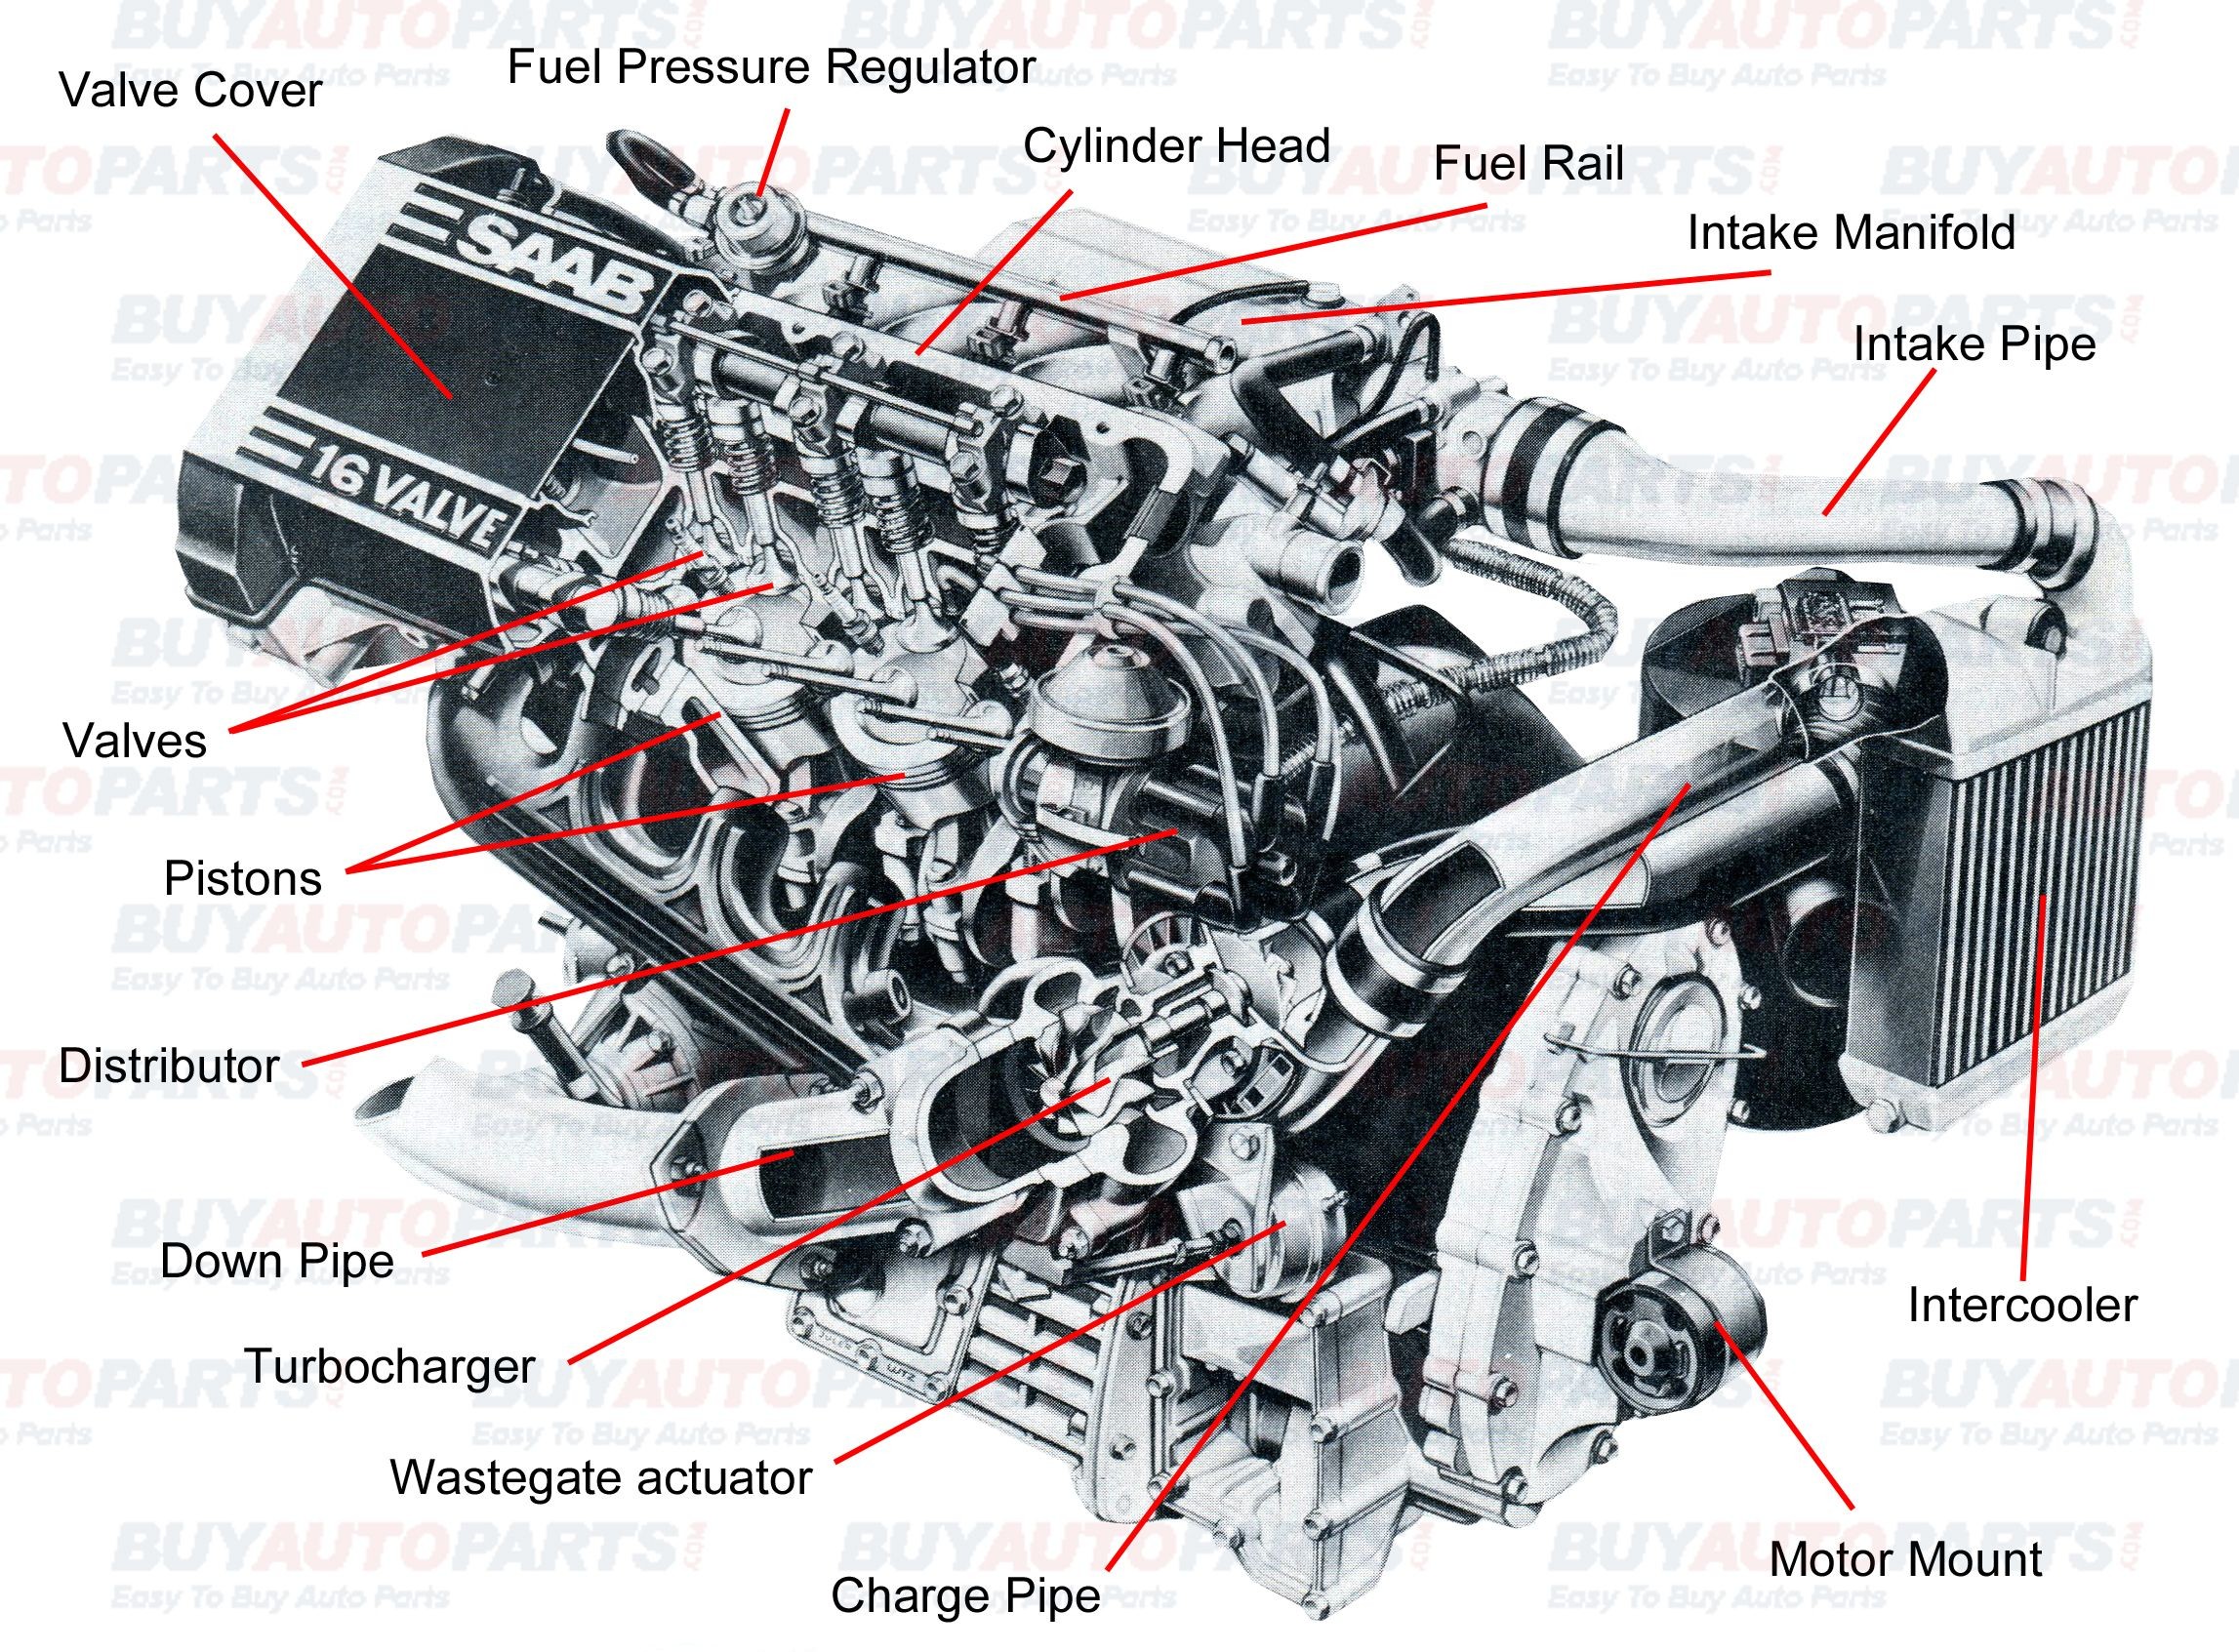 2001 Nissan Sentra Engine Diagram Pin by Jimmiejanet Testellamwfz On What Does An Engine with Of 2001 Nissan Sentra Engine Diagram